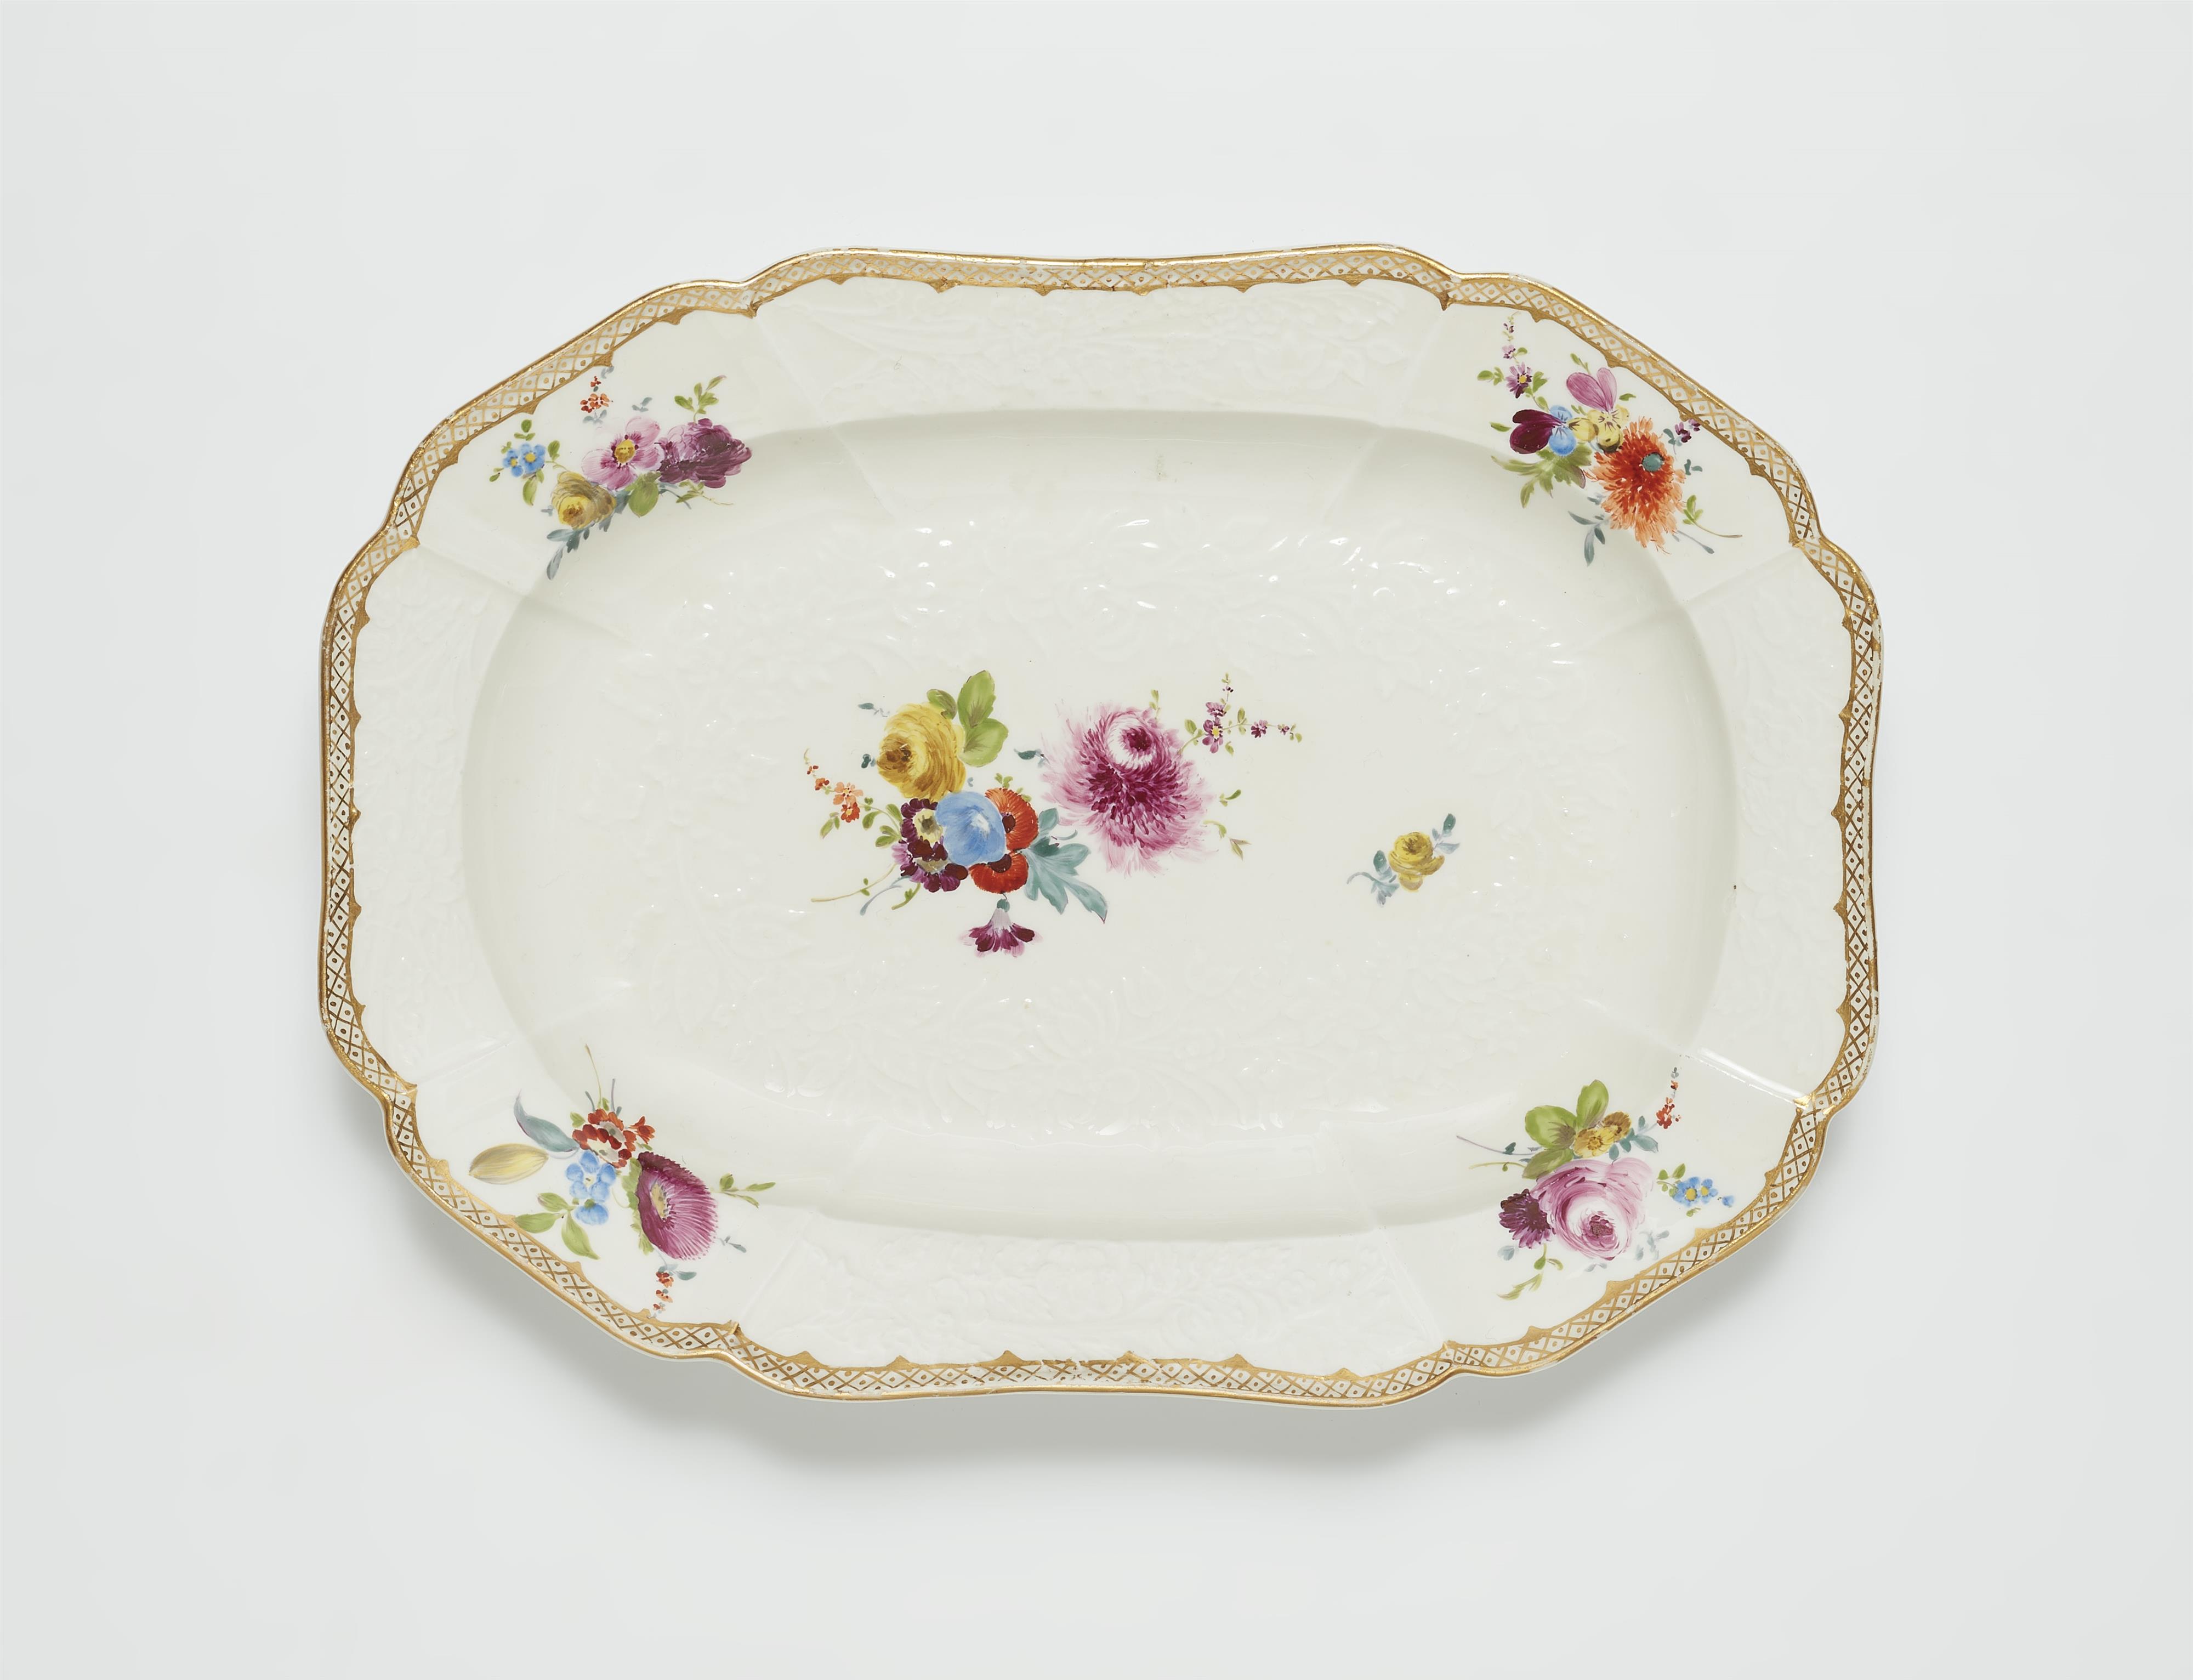 A Meissen porcelain platter from a dinner service with floral decor - image-1